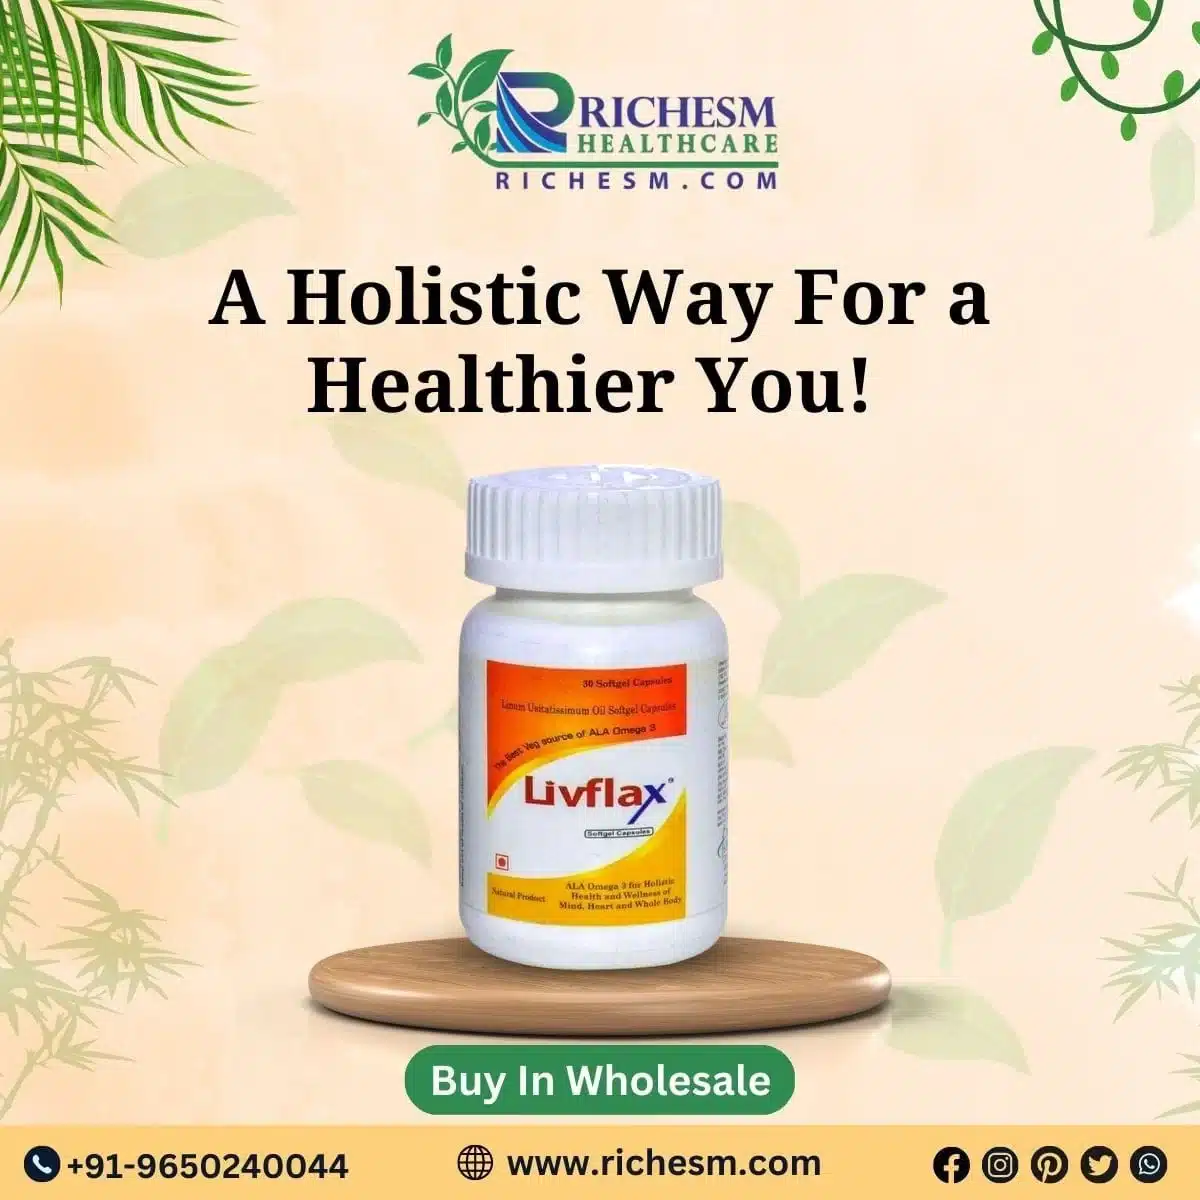 Buy Healthy Organic Products At Wholesale Price Online